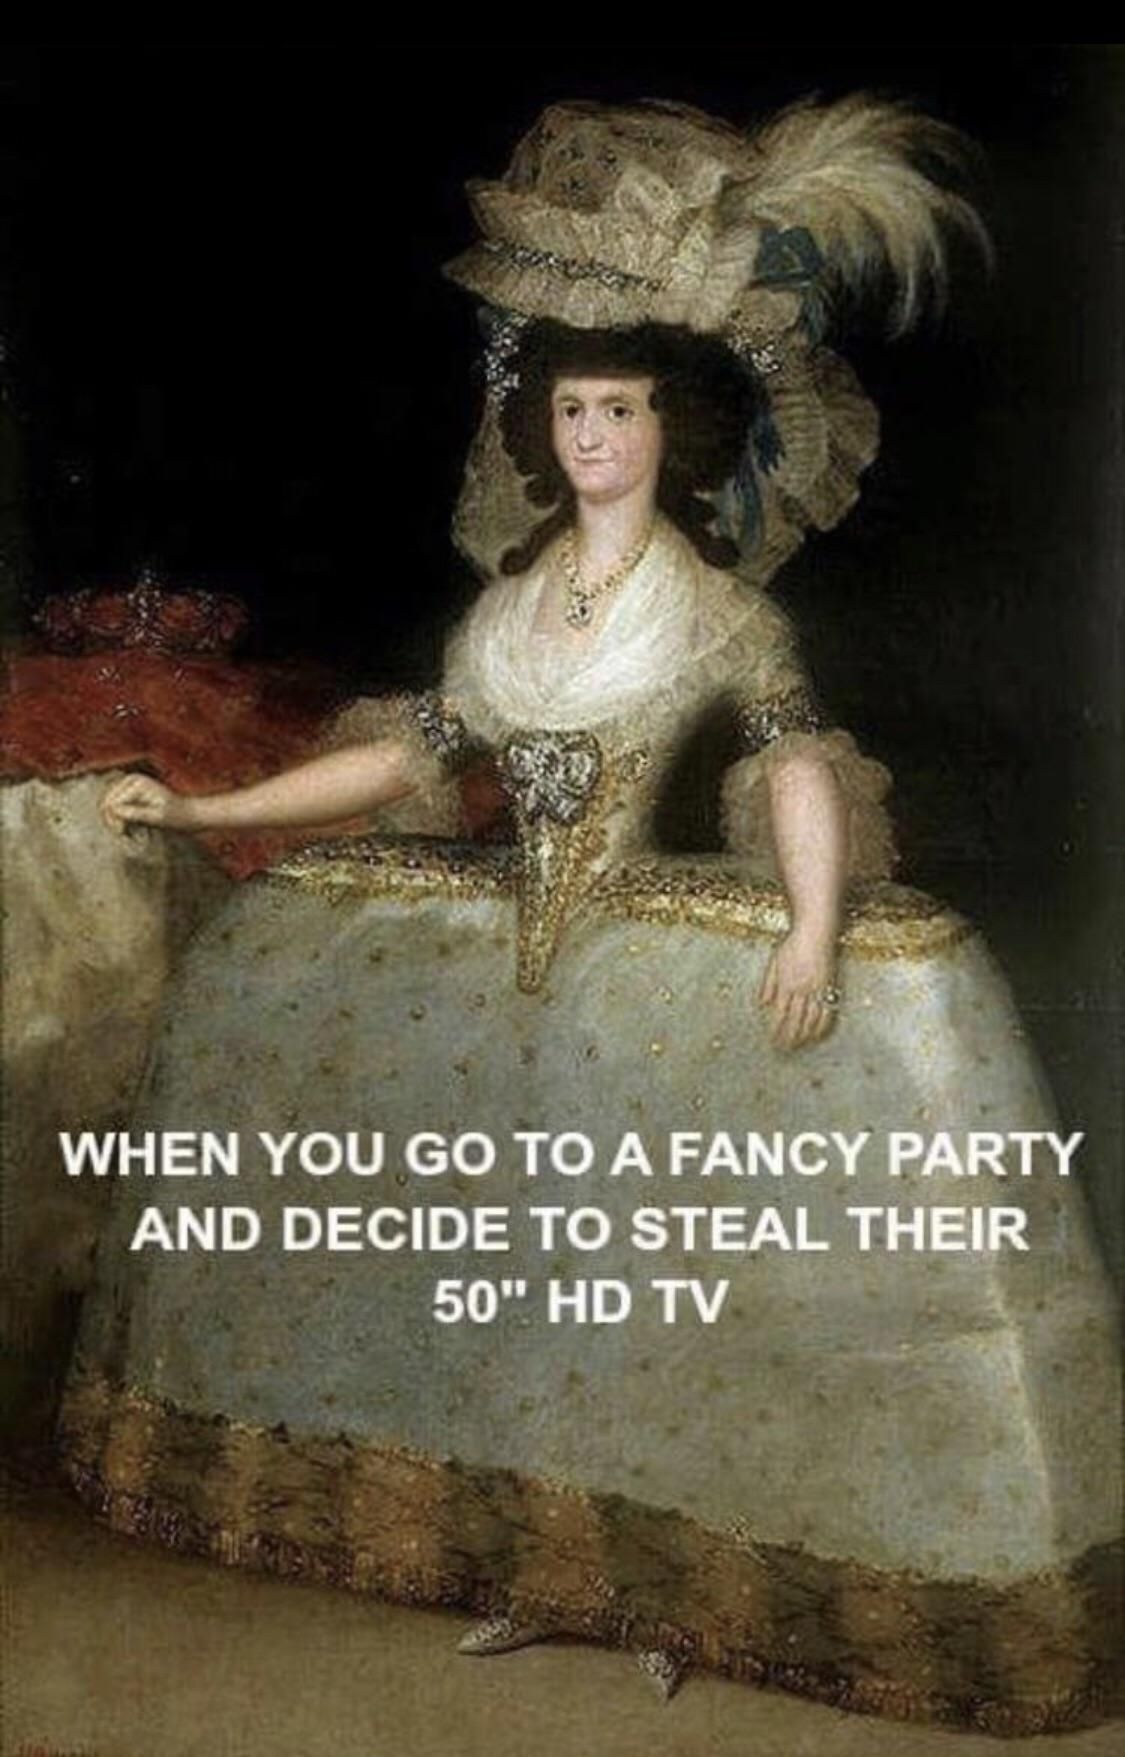 When you go to a party and steal a TV.